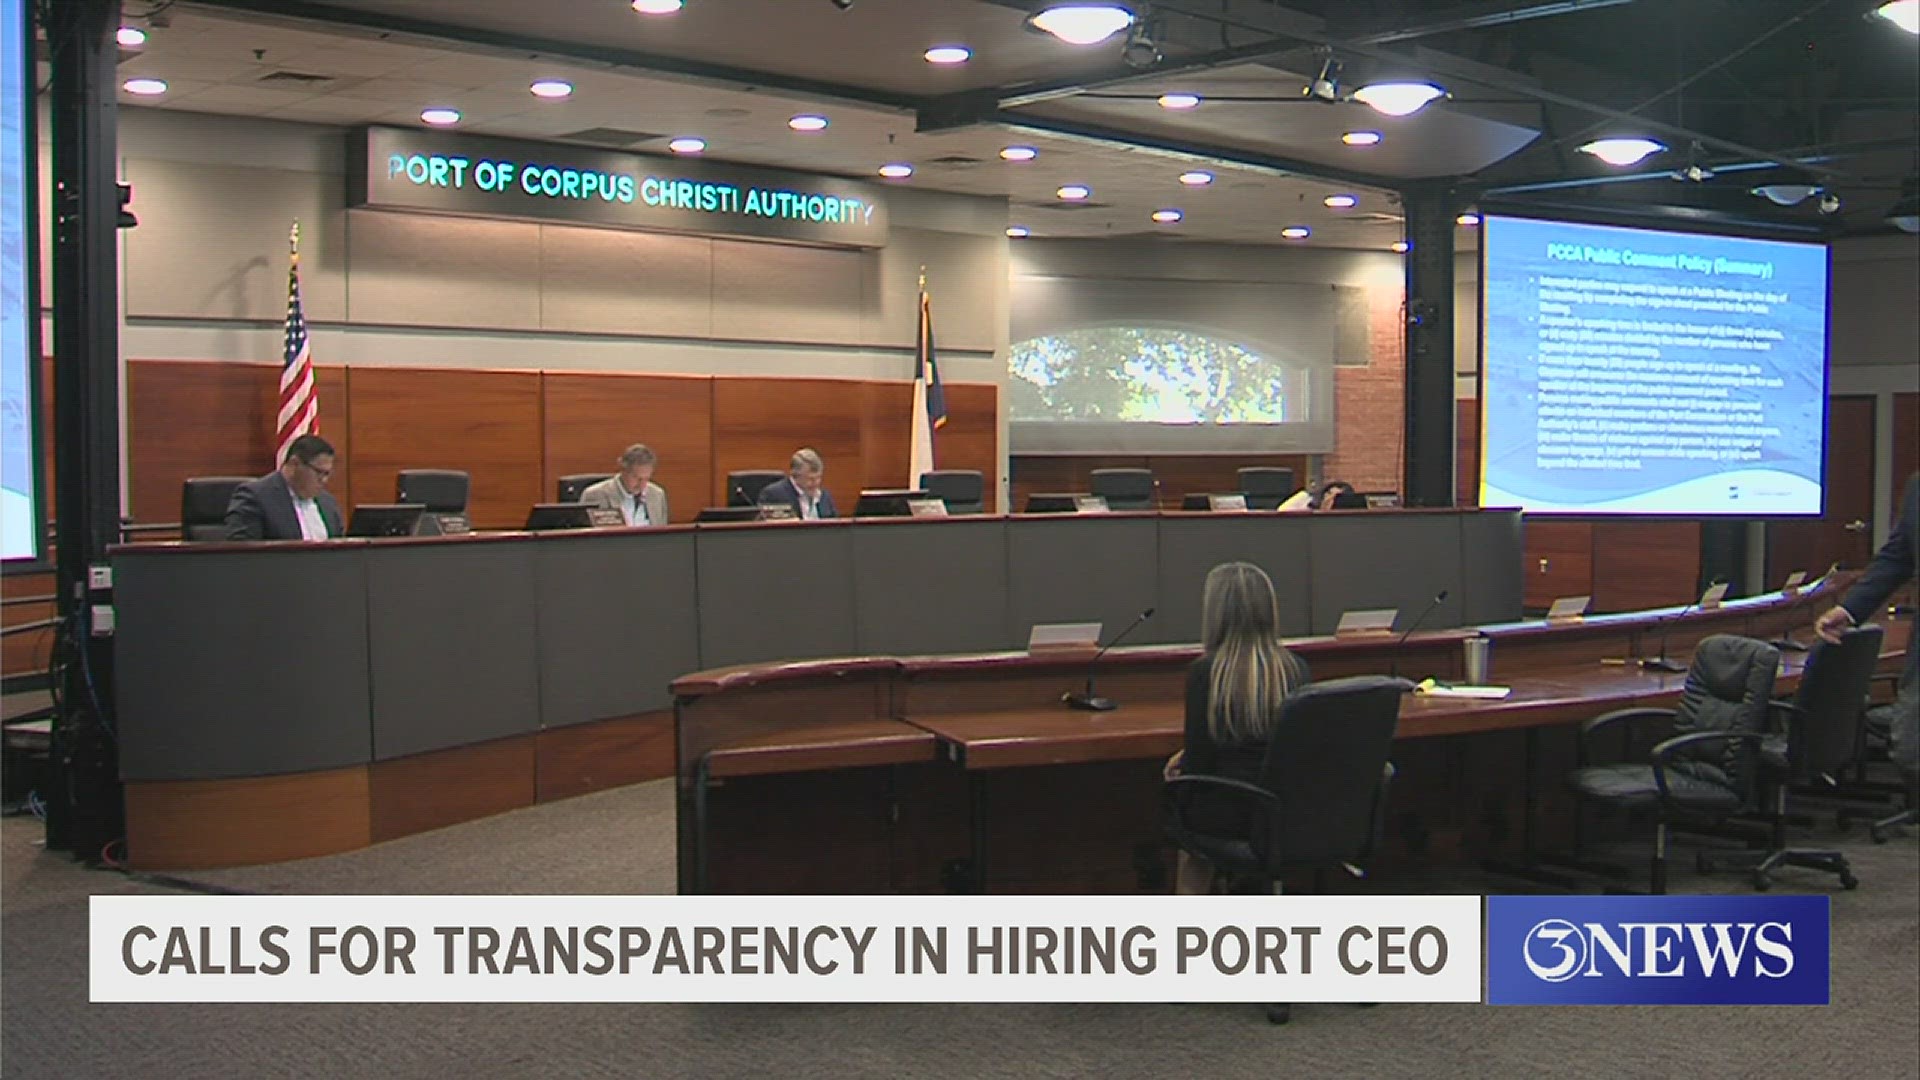 Residents are asking for transparency as search for new port CEO continues.